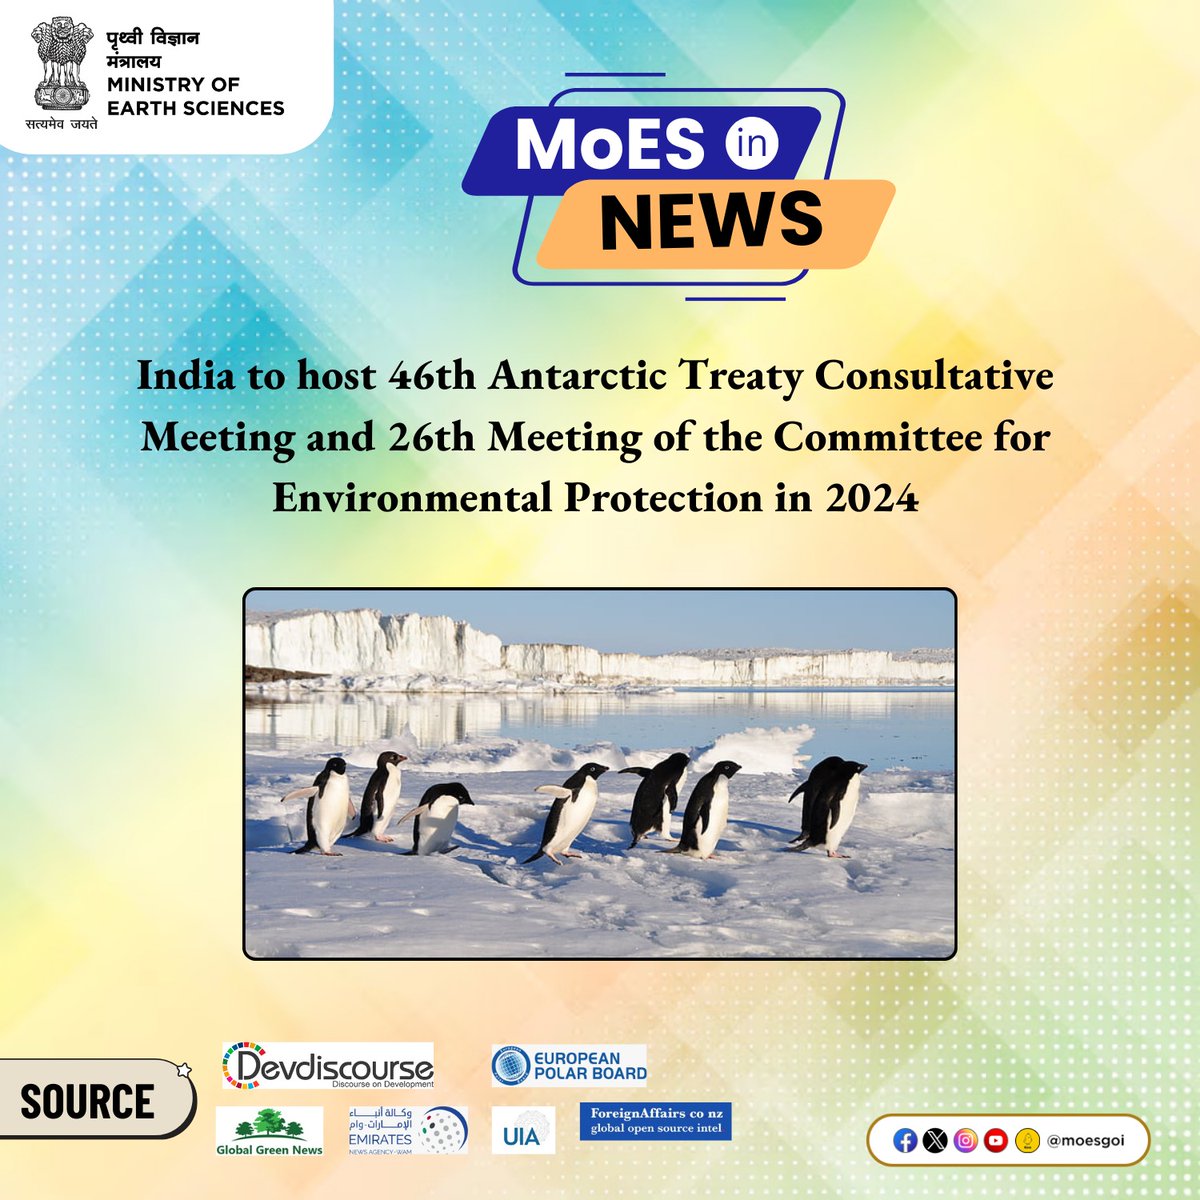 MoESInNews!
NCPOR to host the 46th Antarctic Treaty Consultative Meeting and the 26th Meeting of the Committee for Environmental Protection in 2024. 🌎 This marks a significant milestone for India in terms of global collaboration and environmental stewardship.